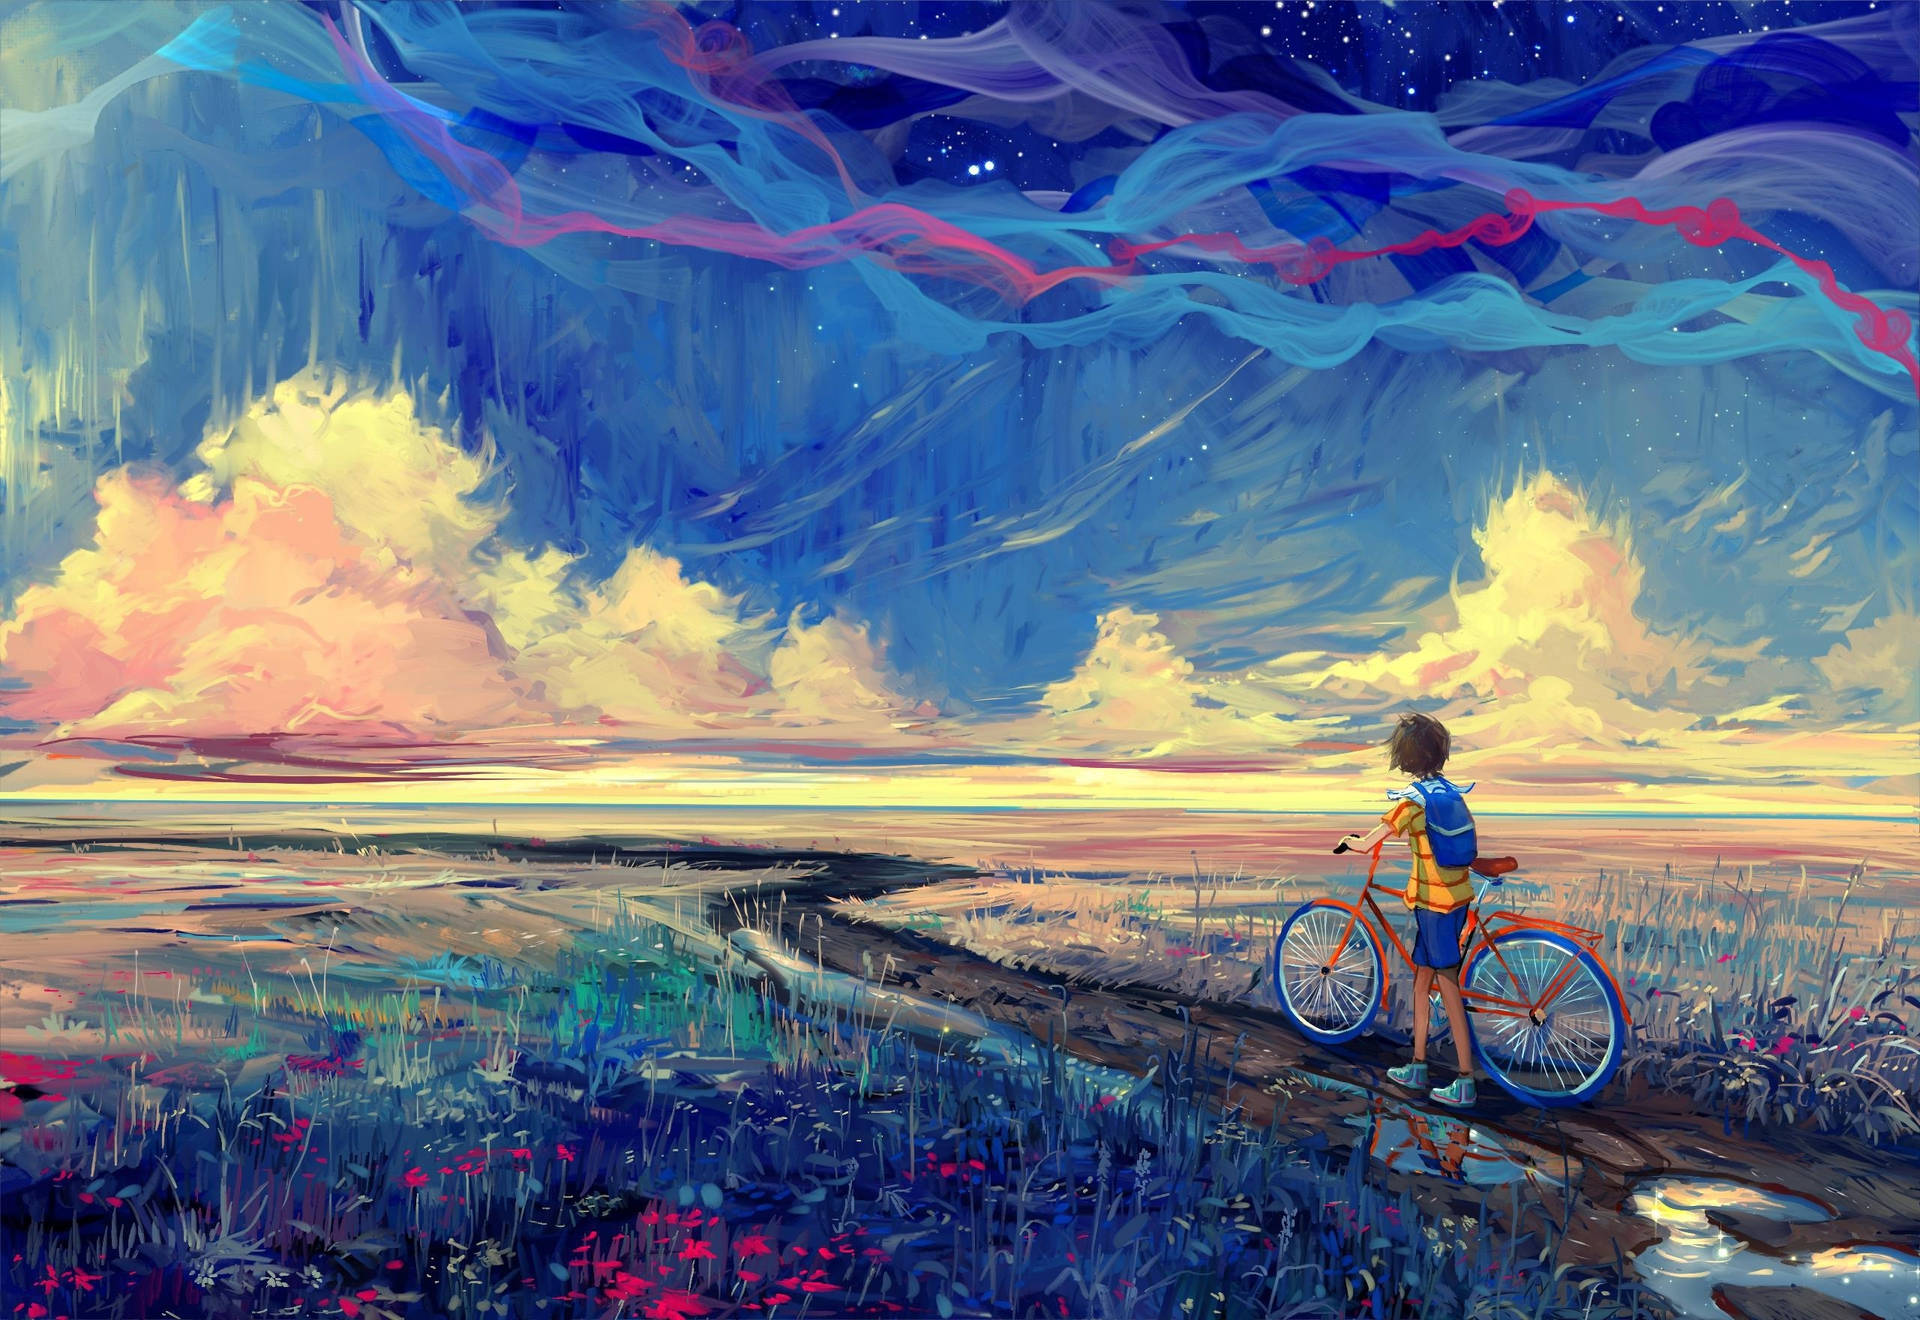 Boy With Bicycle Art Wallpaper